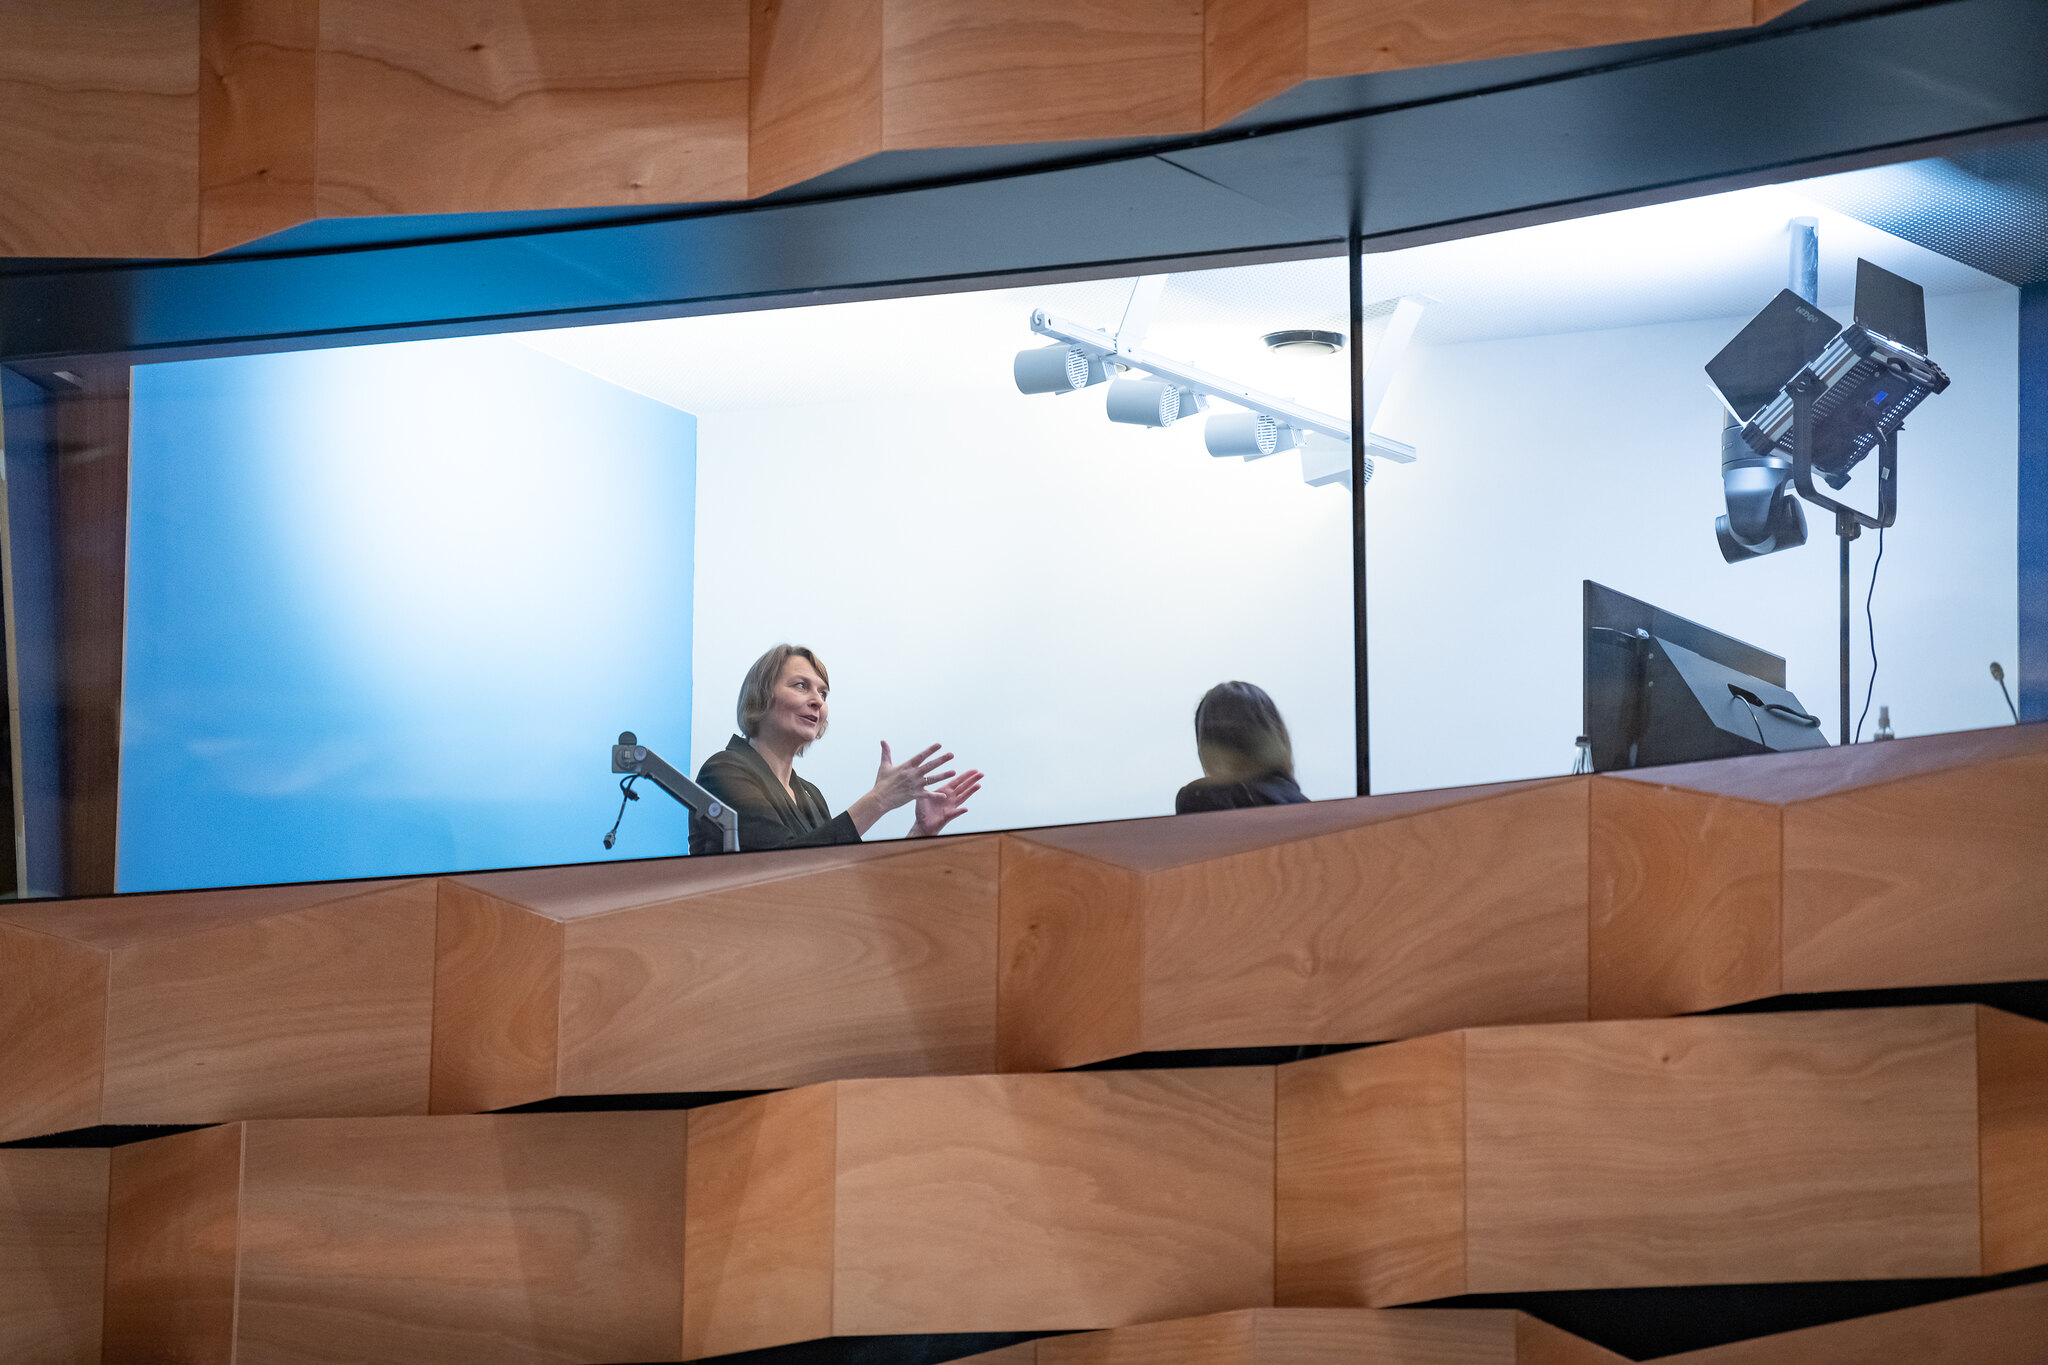 A photo taken from below, looking up to a windowed room. Two women are facing each other inside the room. The woman on the left stands in front a blue wall, gesturing. On the right is television screen and lighting equipment. 